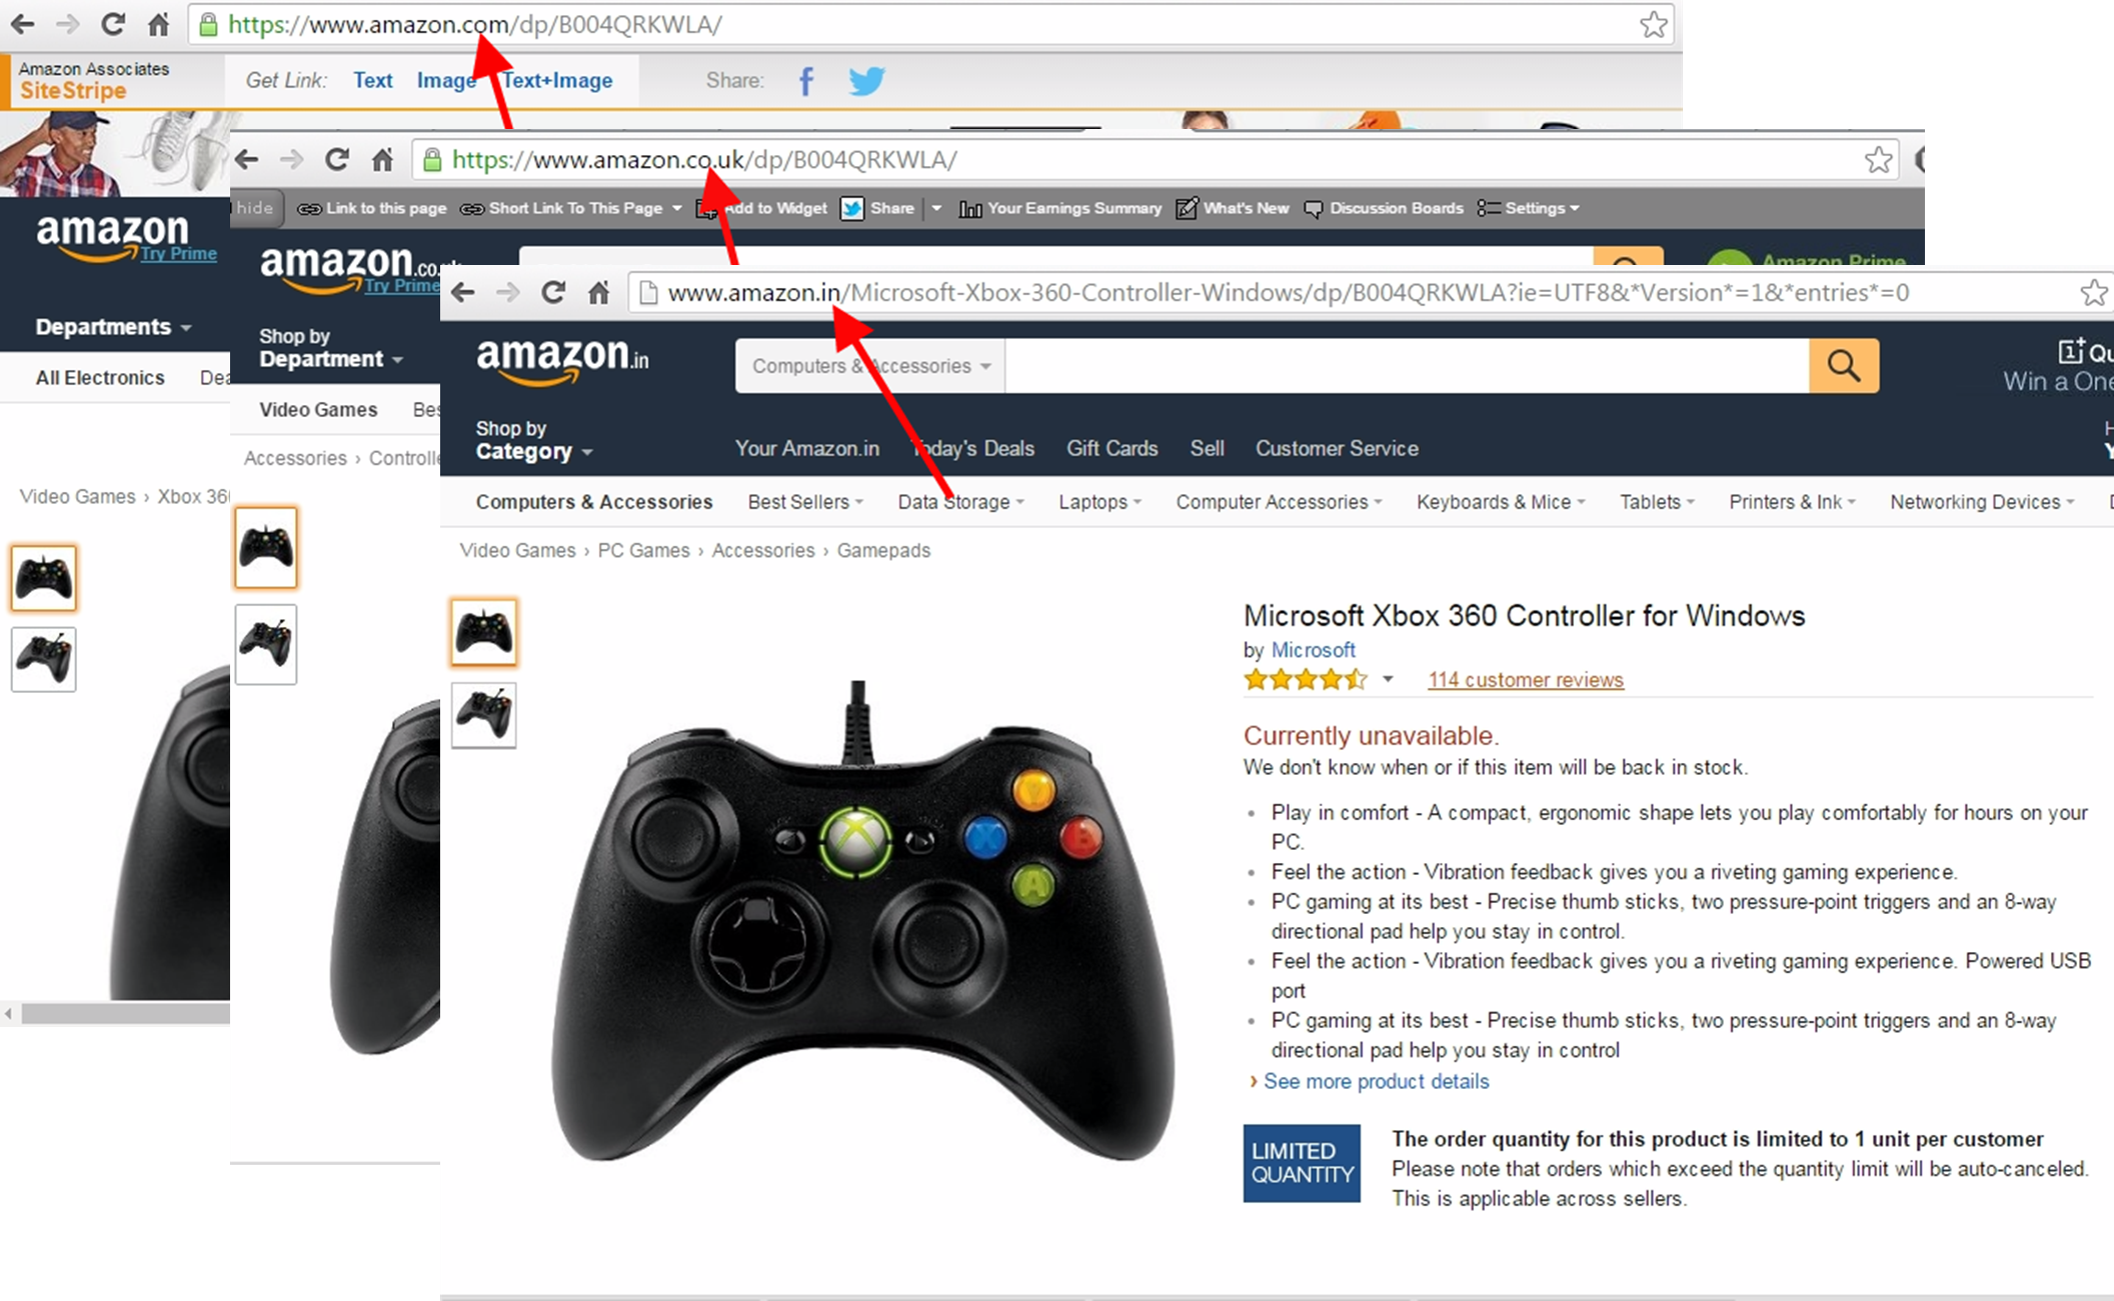 And this works across Product Pages, Search Pages, Category Pages and any other page on Amazon,